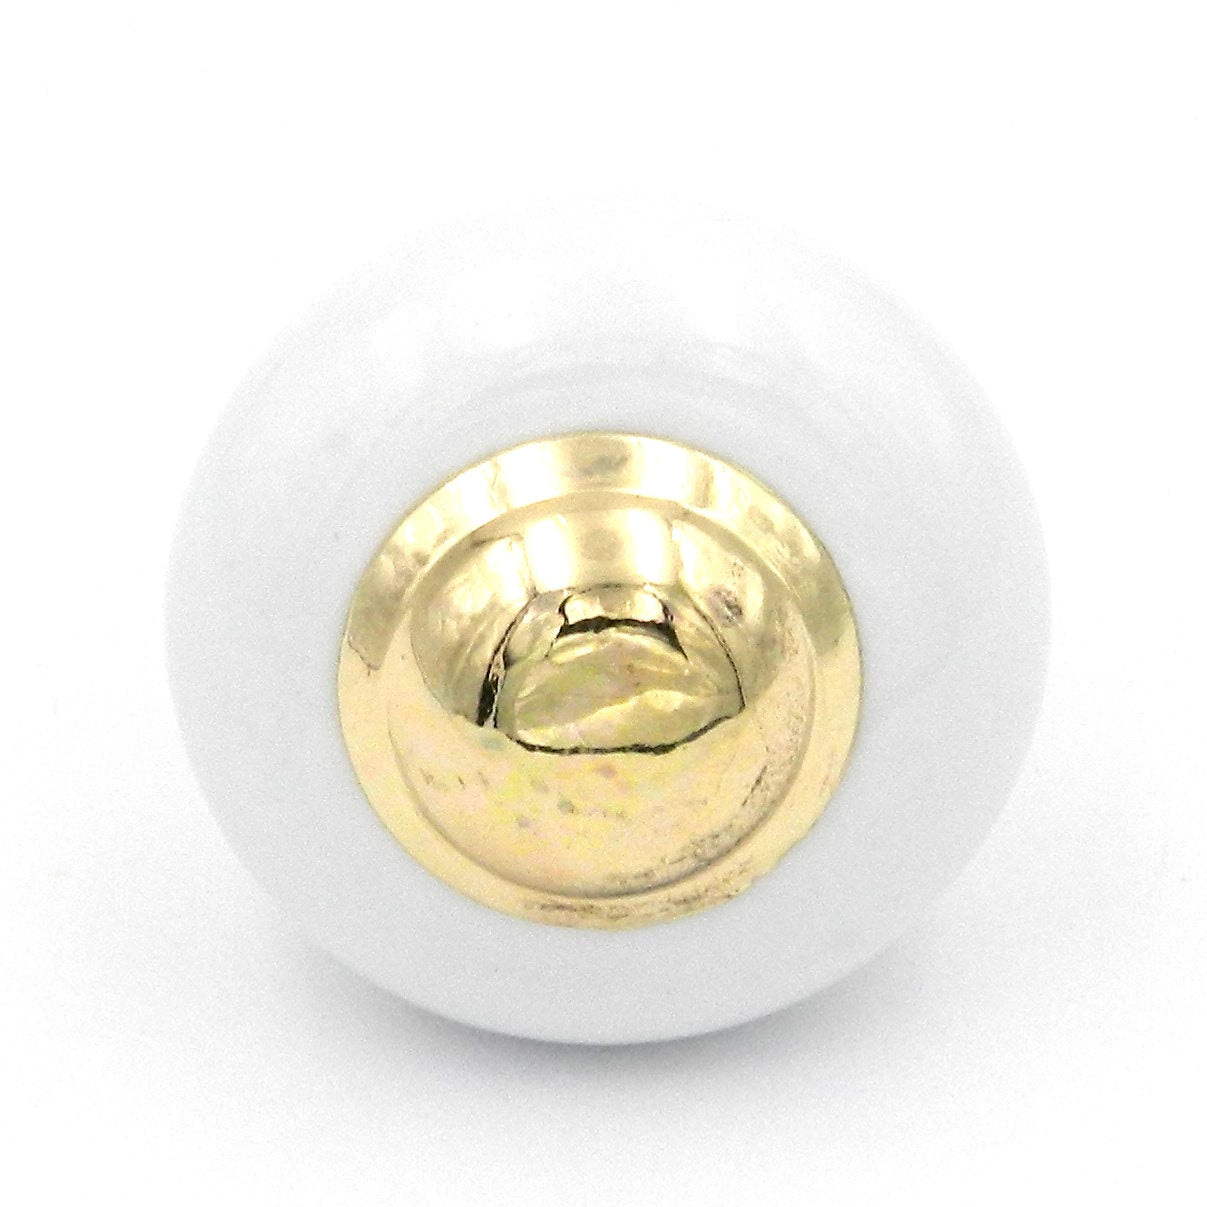 Belwith P722-UB White Porcelain 1 1/4" Cabinet Knob Pull with Ultra Brass Stem